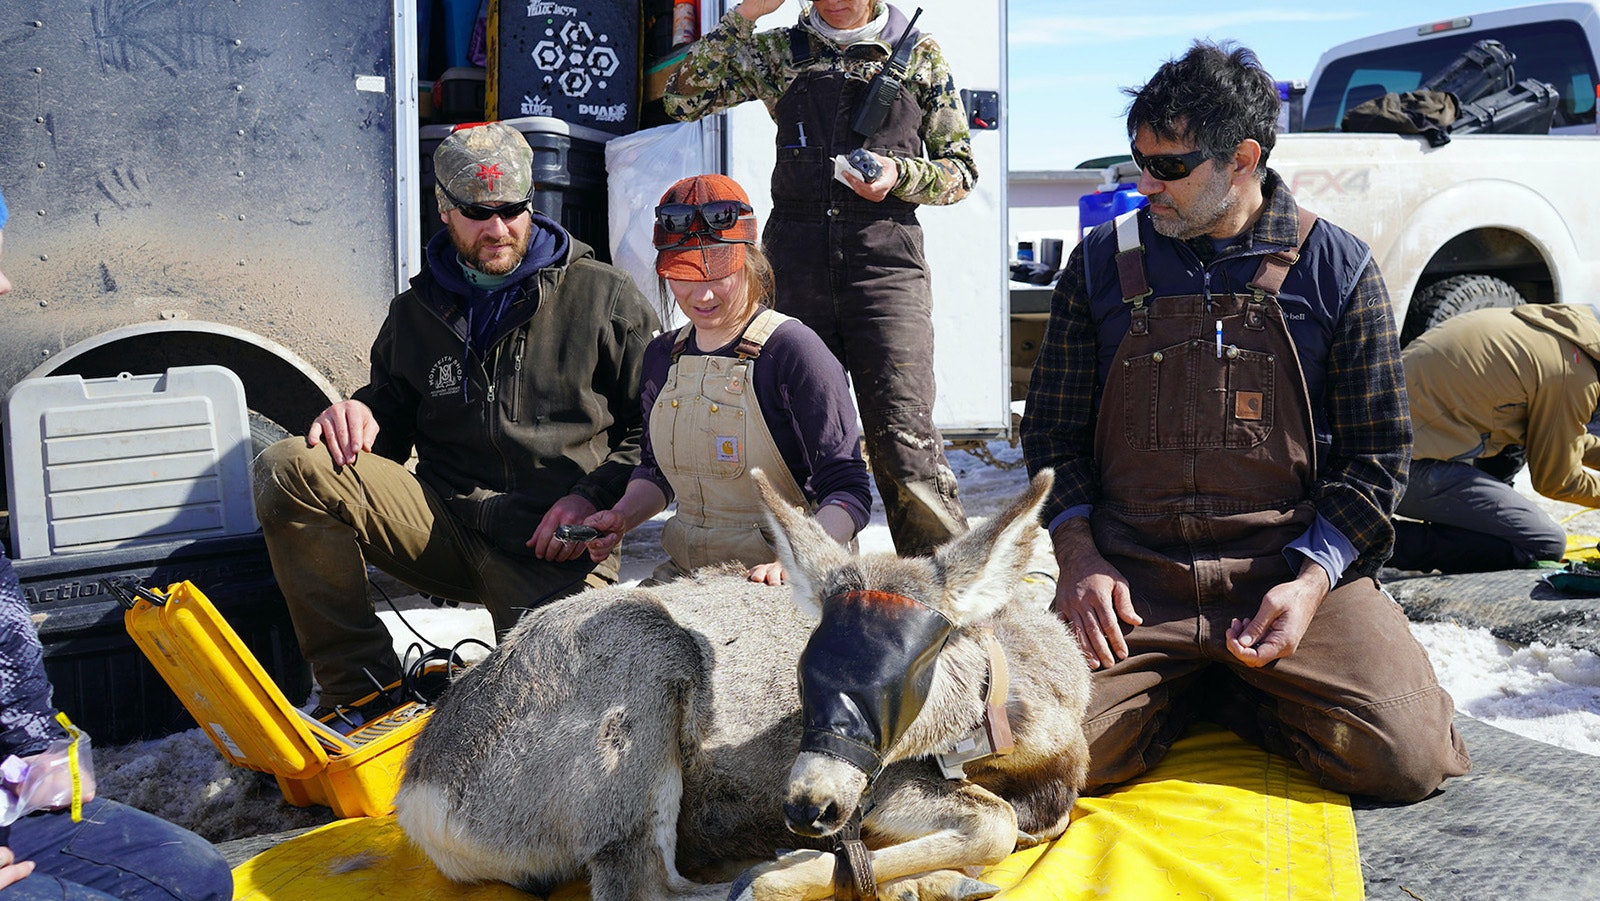 From left, biologists Kevin Monteith, Samantha Dwinnell, Anna Ortega and Matt Kauffman work on Deer 255 during spring migration capture operations near Superior in March 2019.